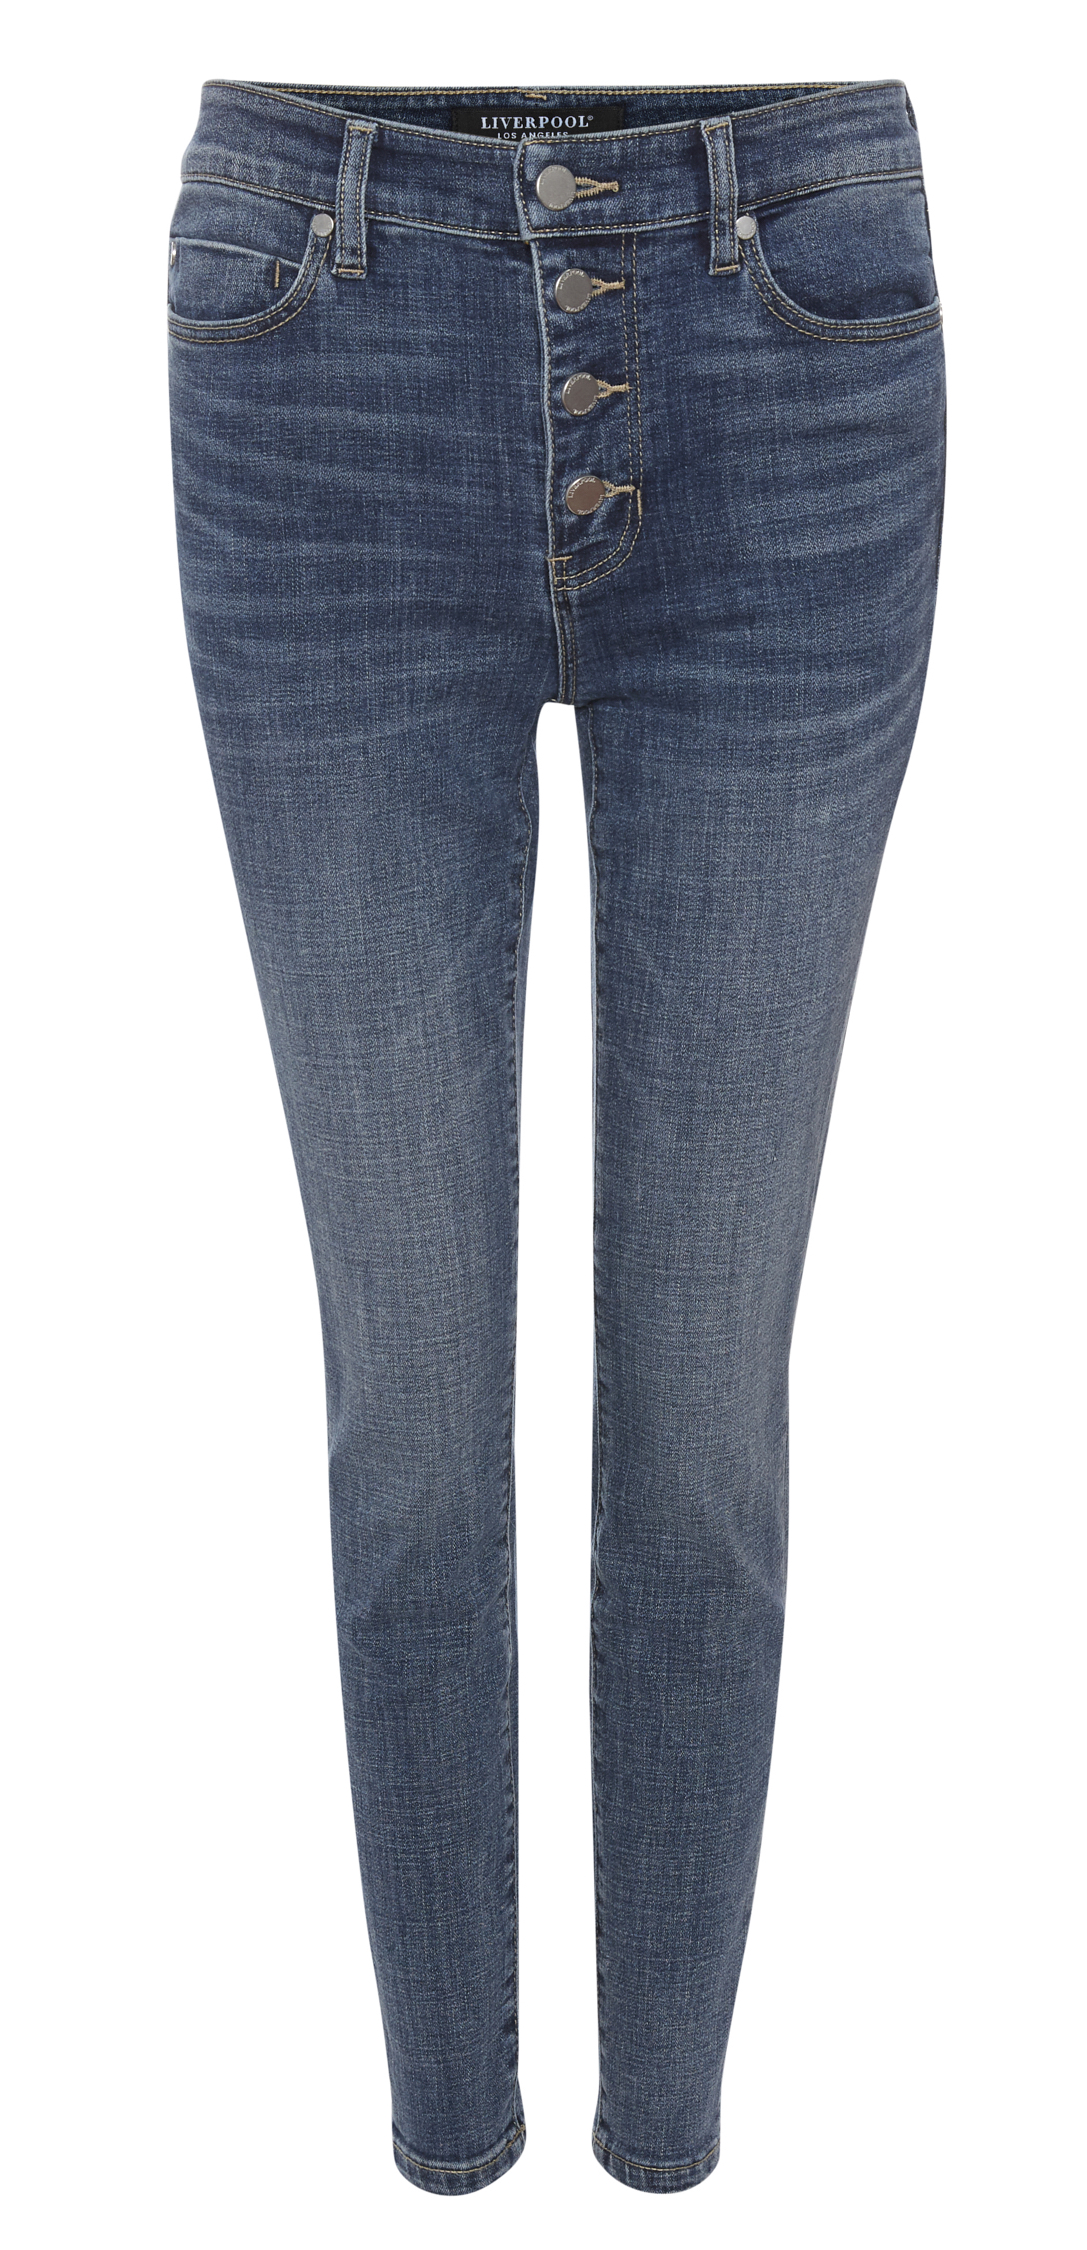 Liverpool Exposed Button Fly Ankle Skinny